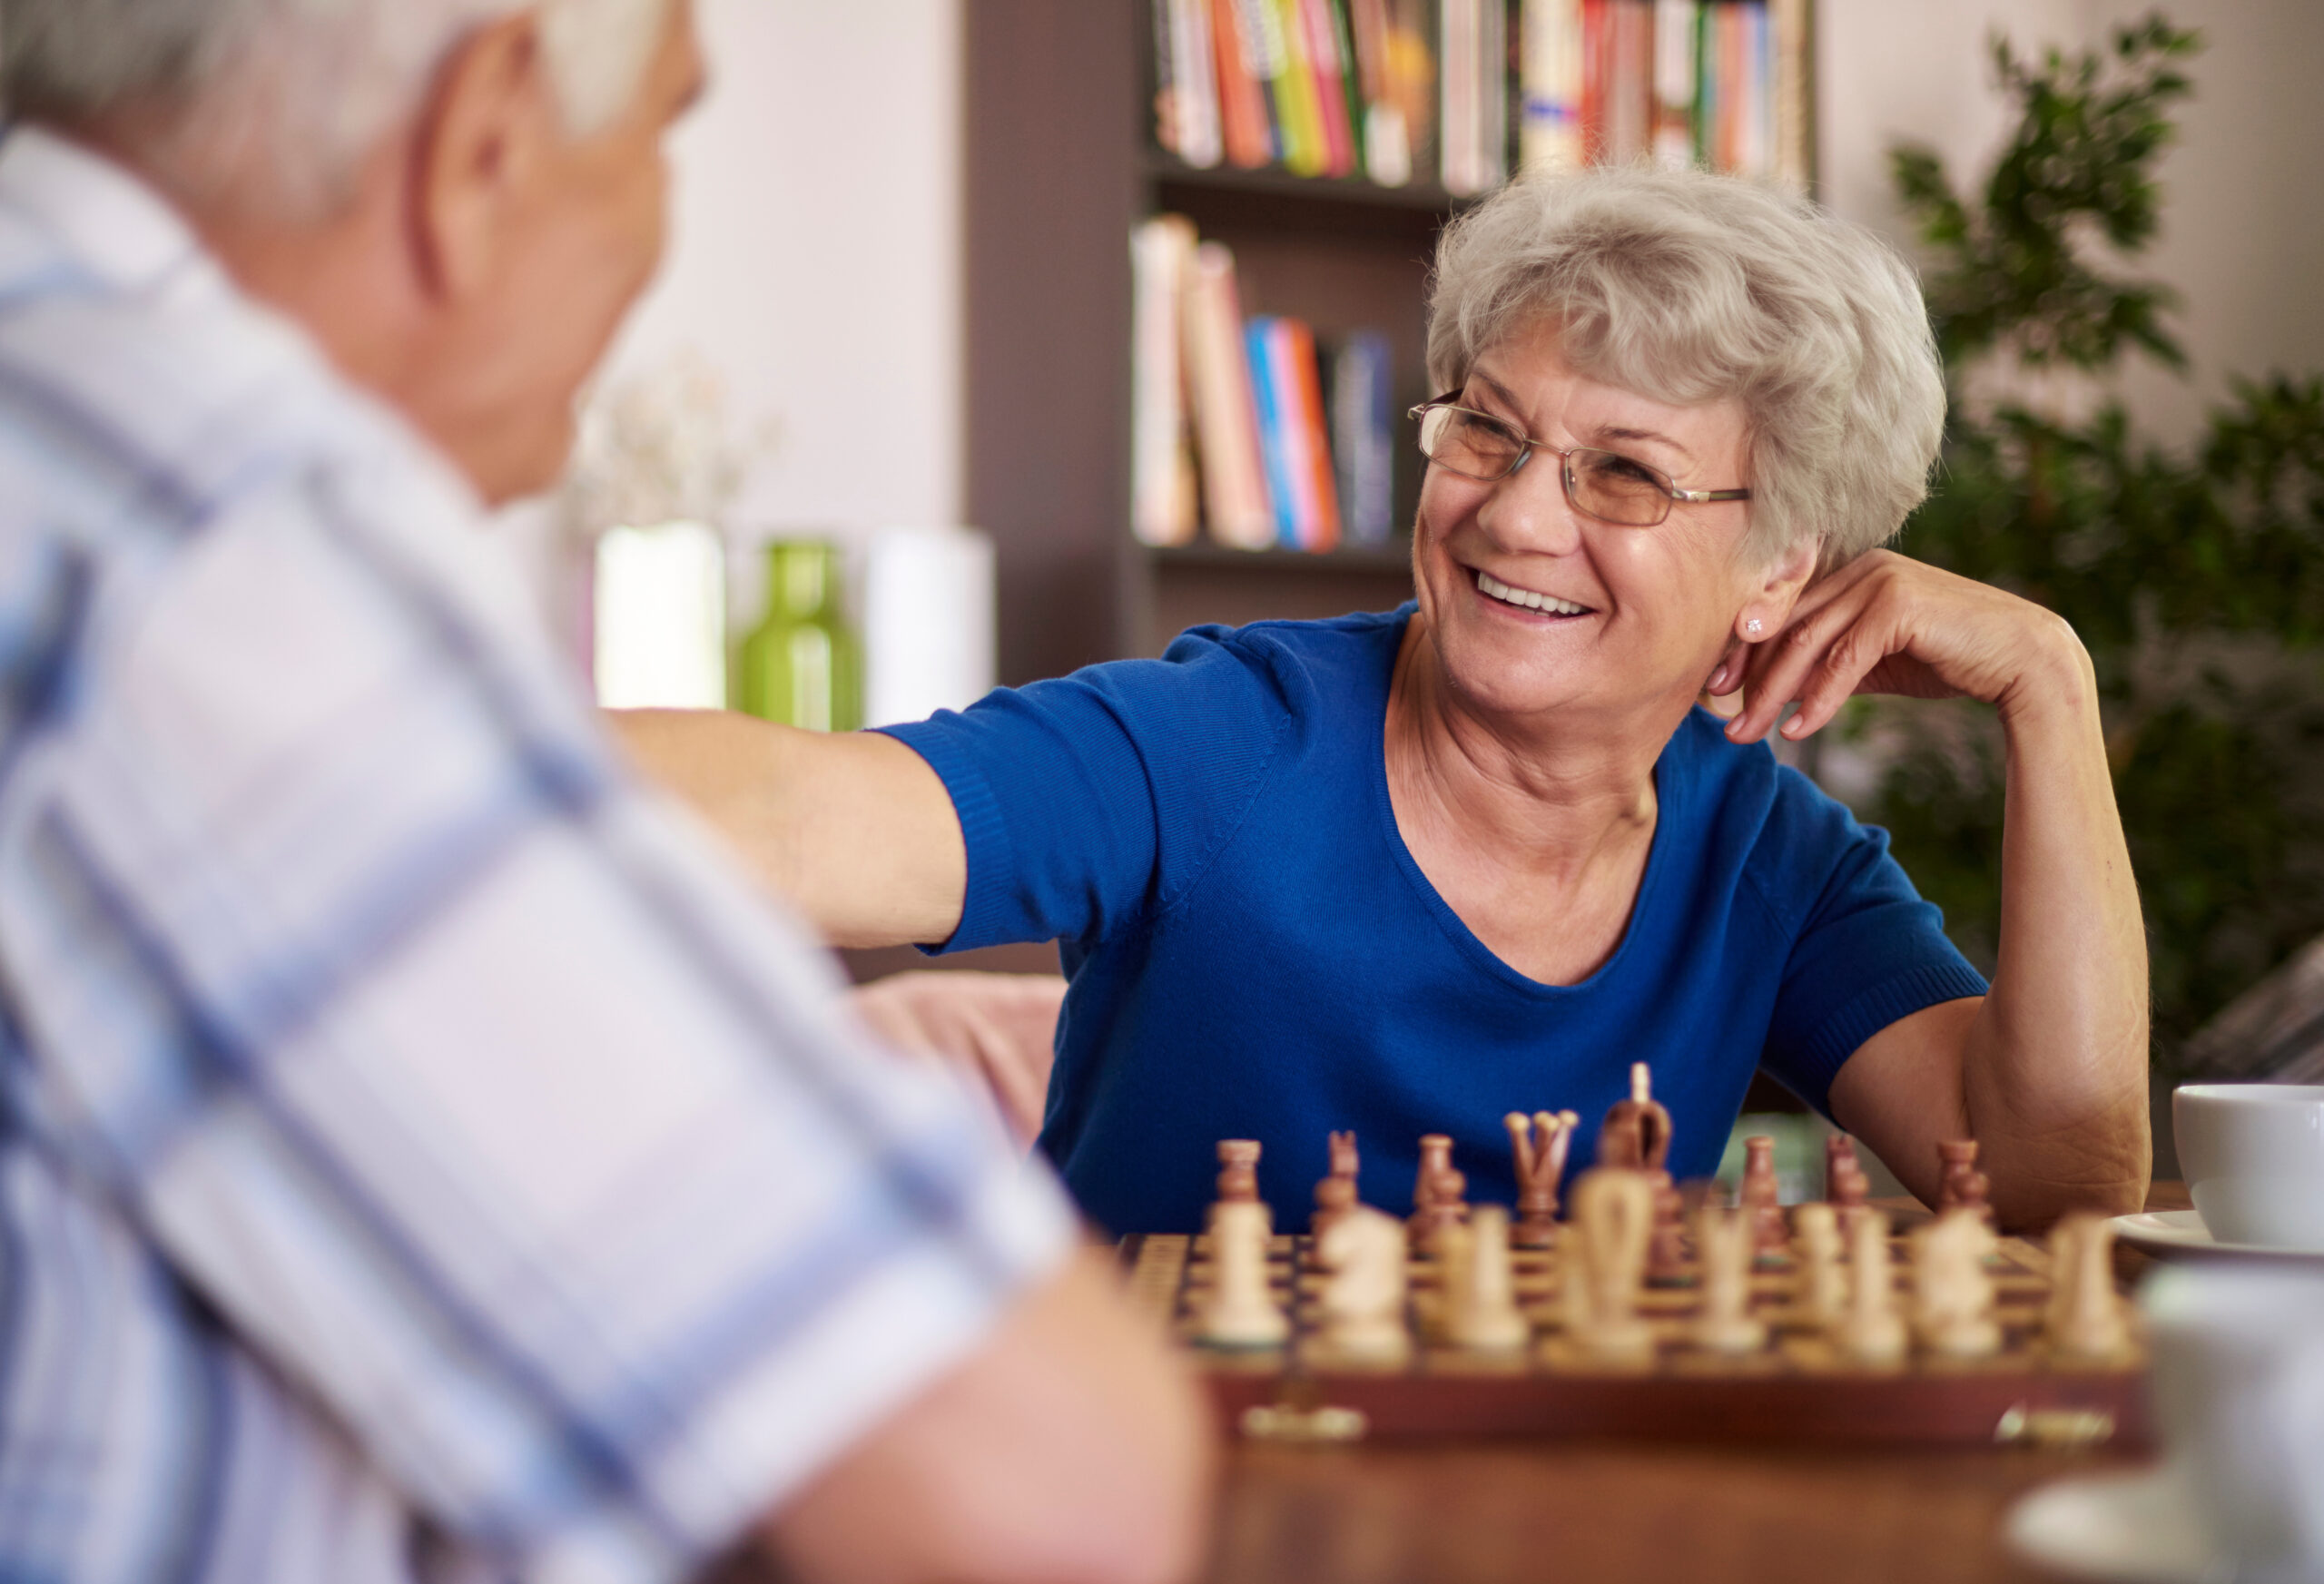 Senior woman smiling as she plays chess with man